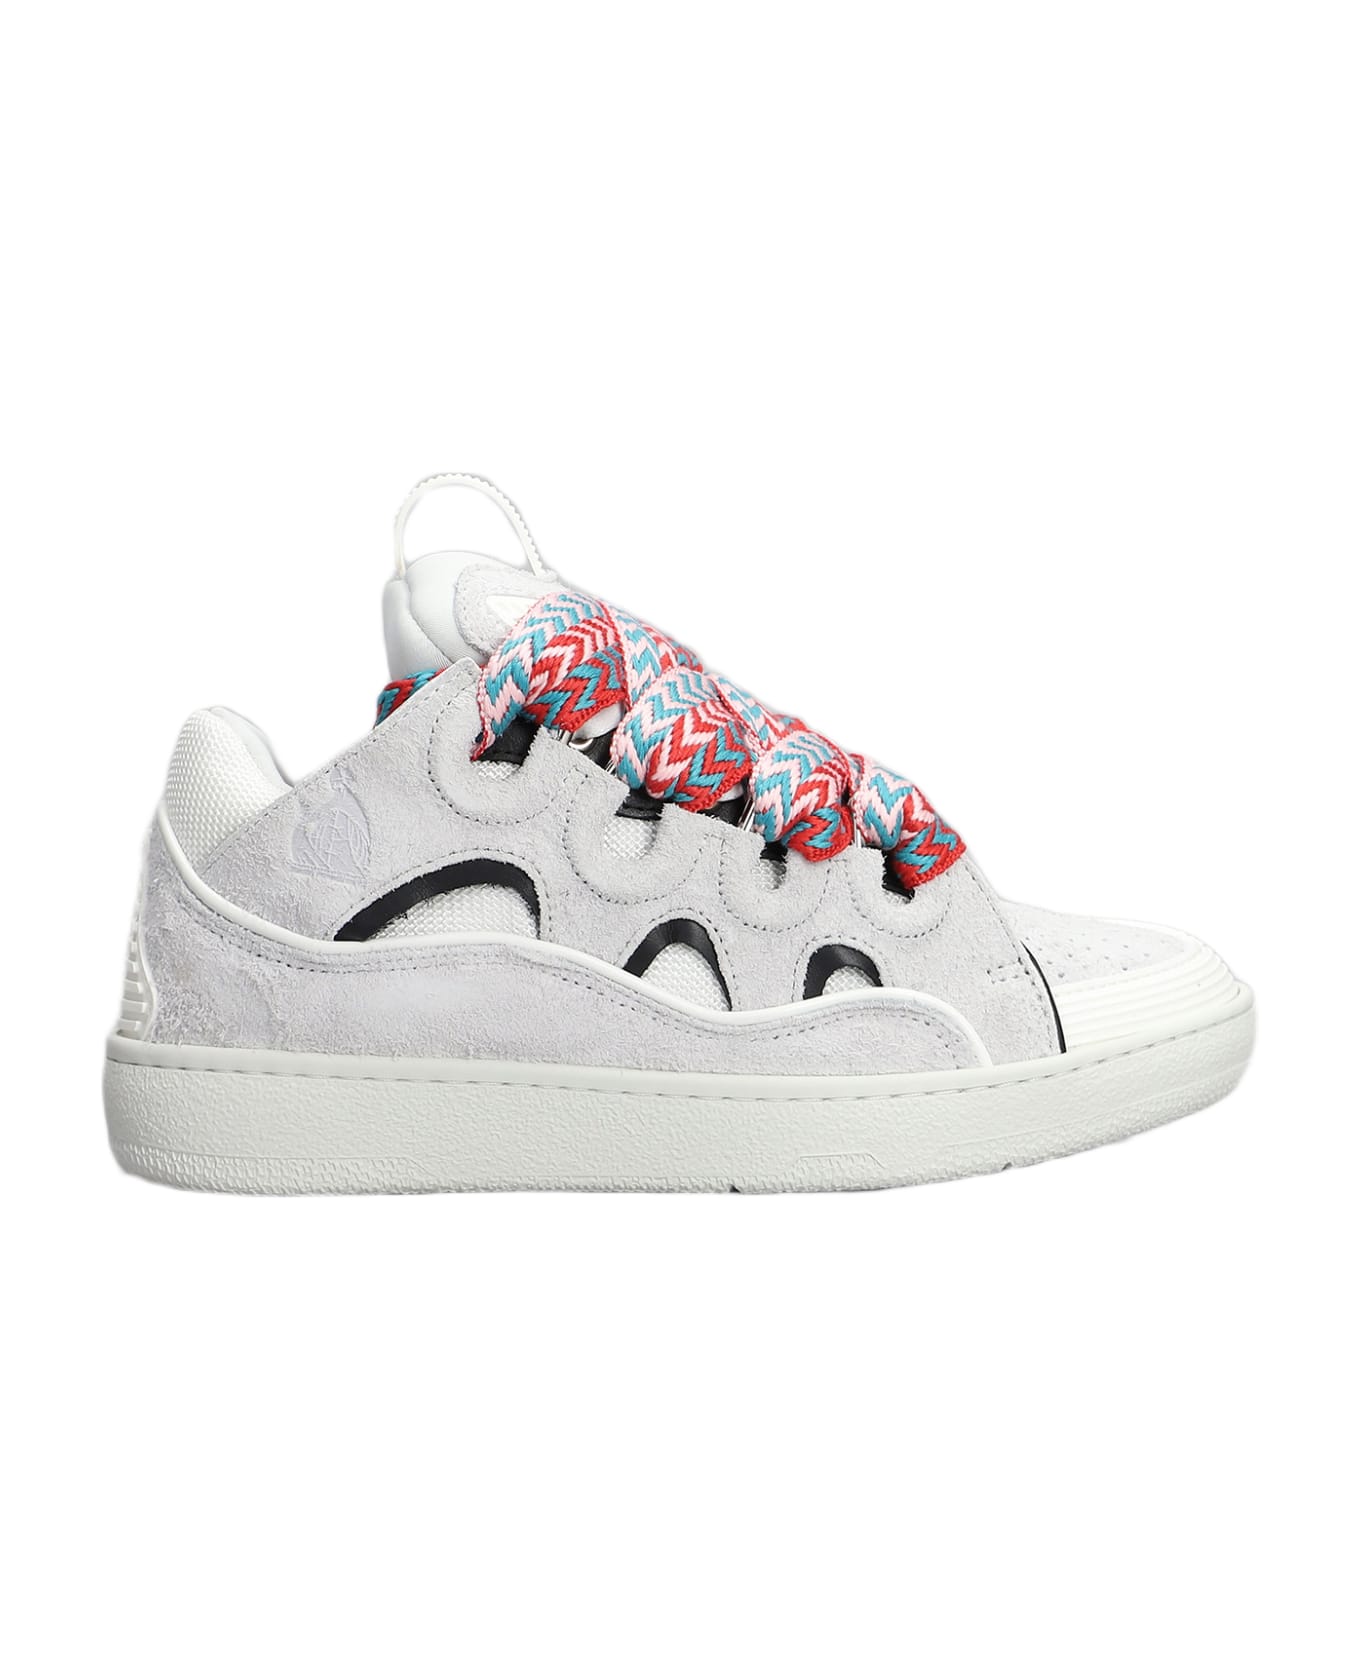 Lanvin Curb Sneakers In White Leather - white スニーカー